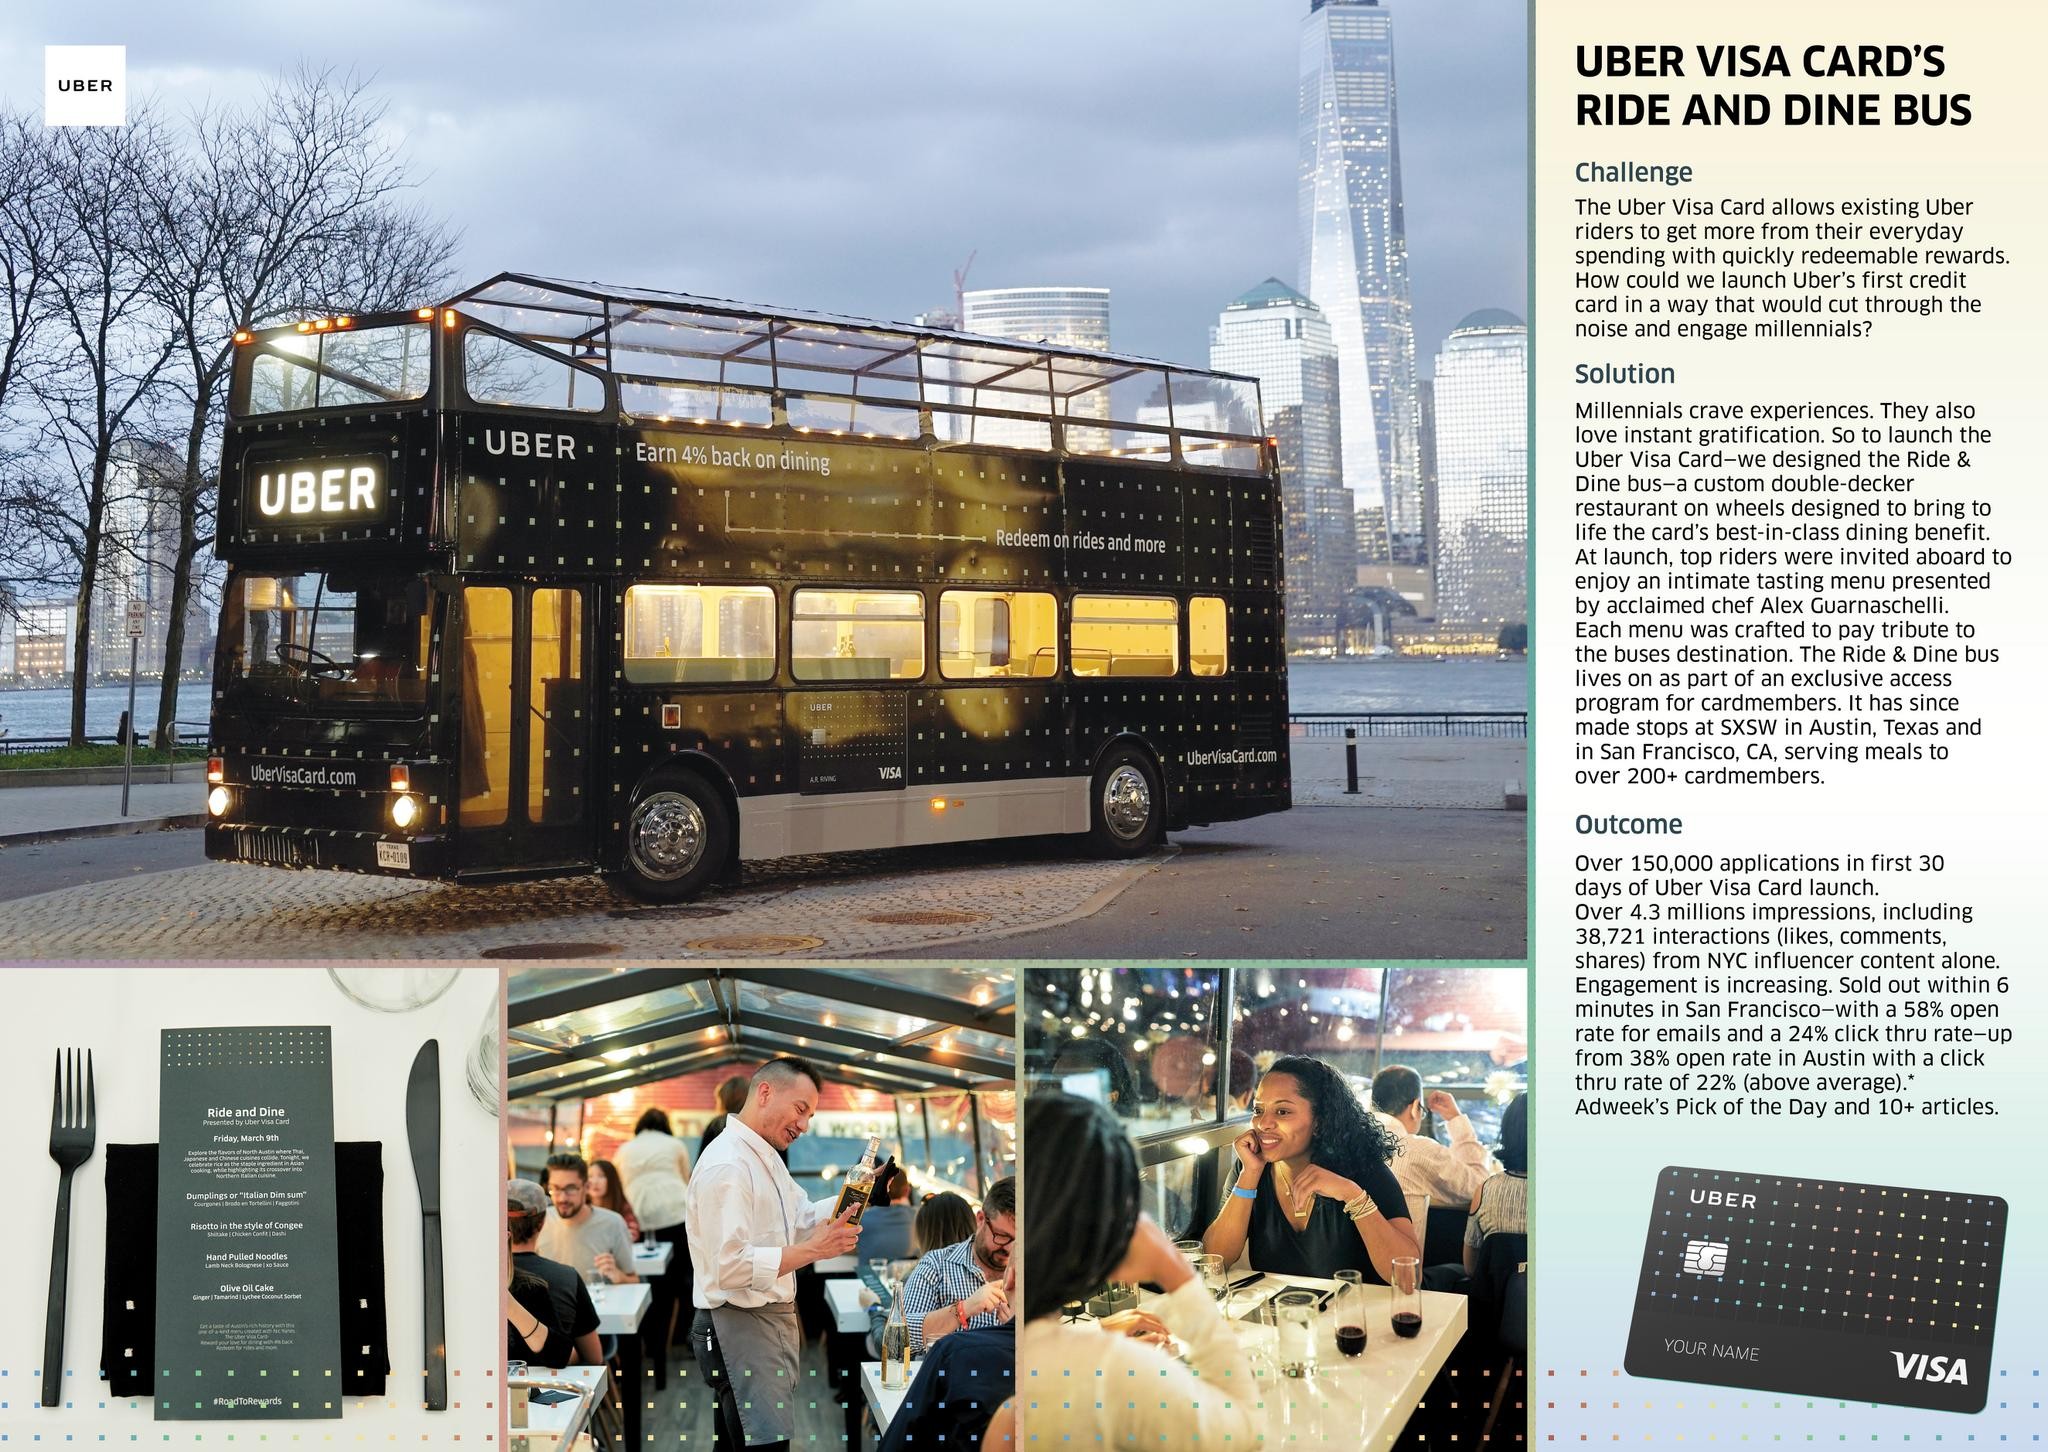 The Uber Visa Card Ride and Dine Bus